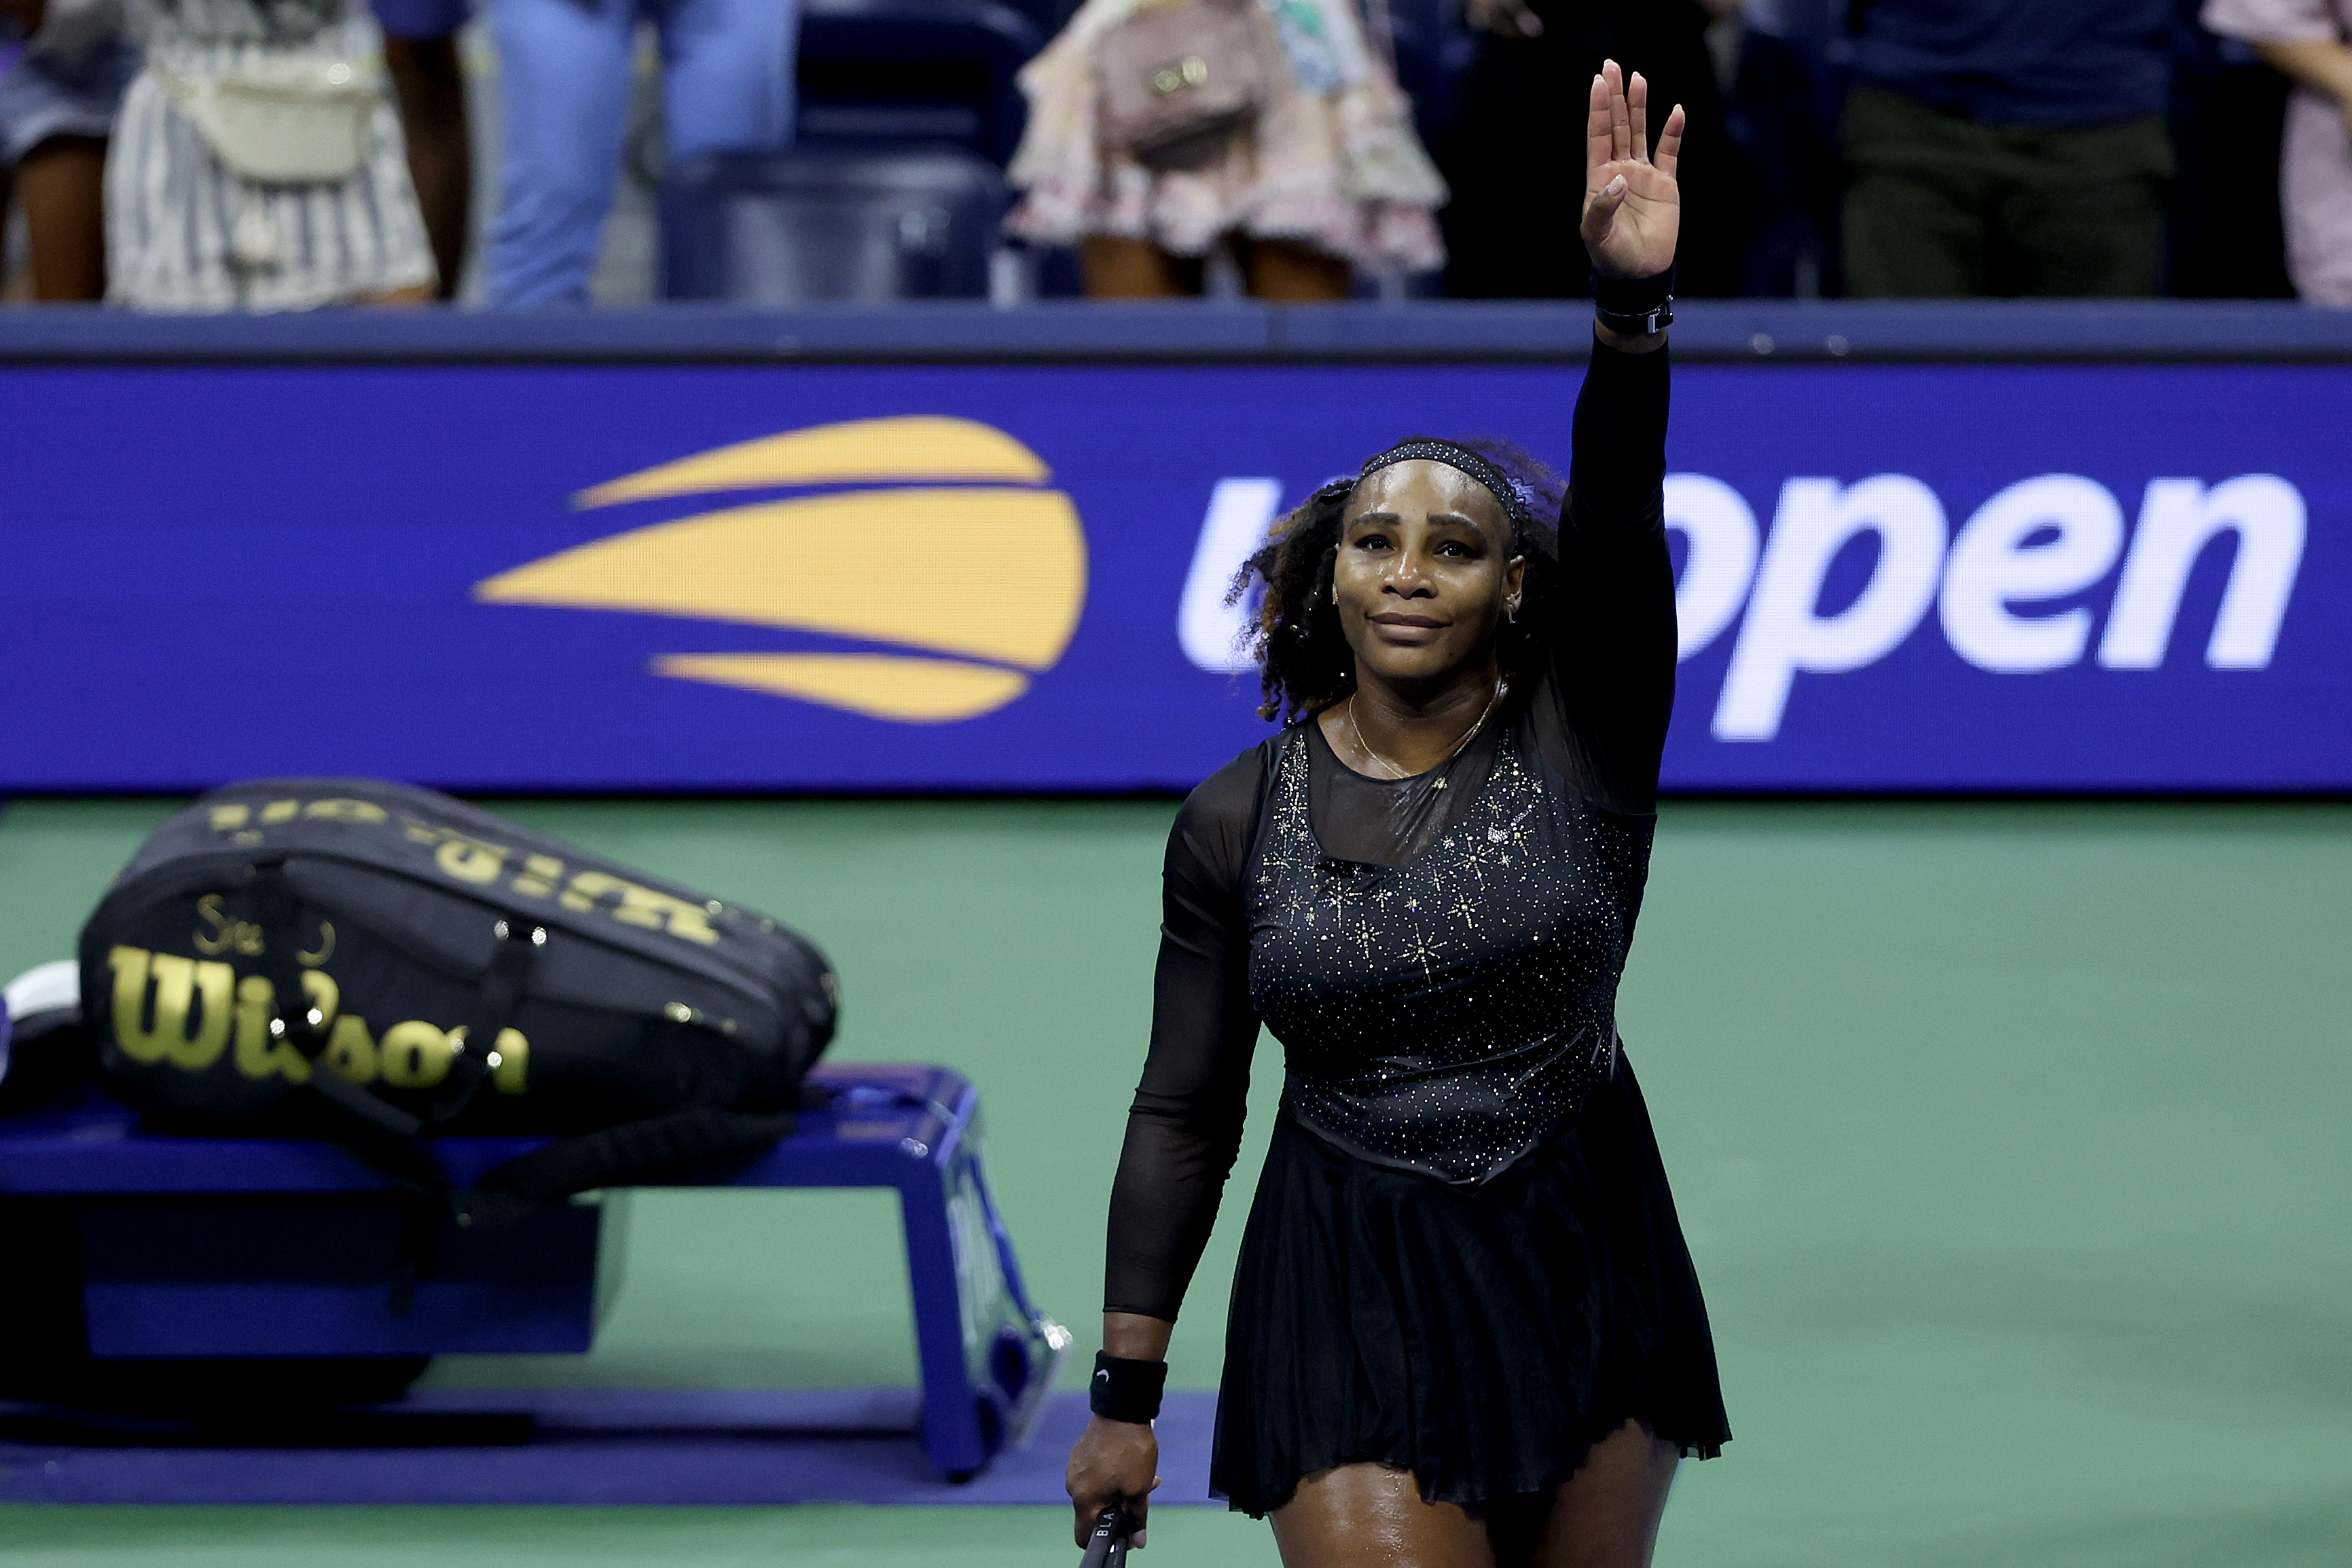 Serena Williams of the United States thanks the fans after being defeated by Ajla Tomlijanovic of Australia during their Third Round match on Day Five of the 2022 US Open in New York City on September 2, 2022. (Matthew Stockman—Getty Images)